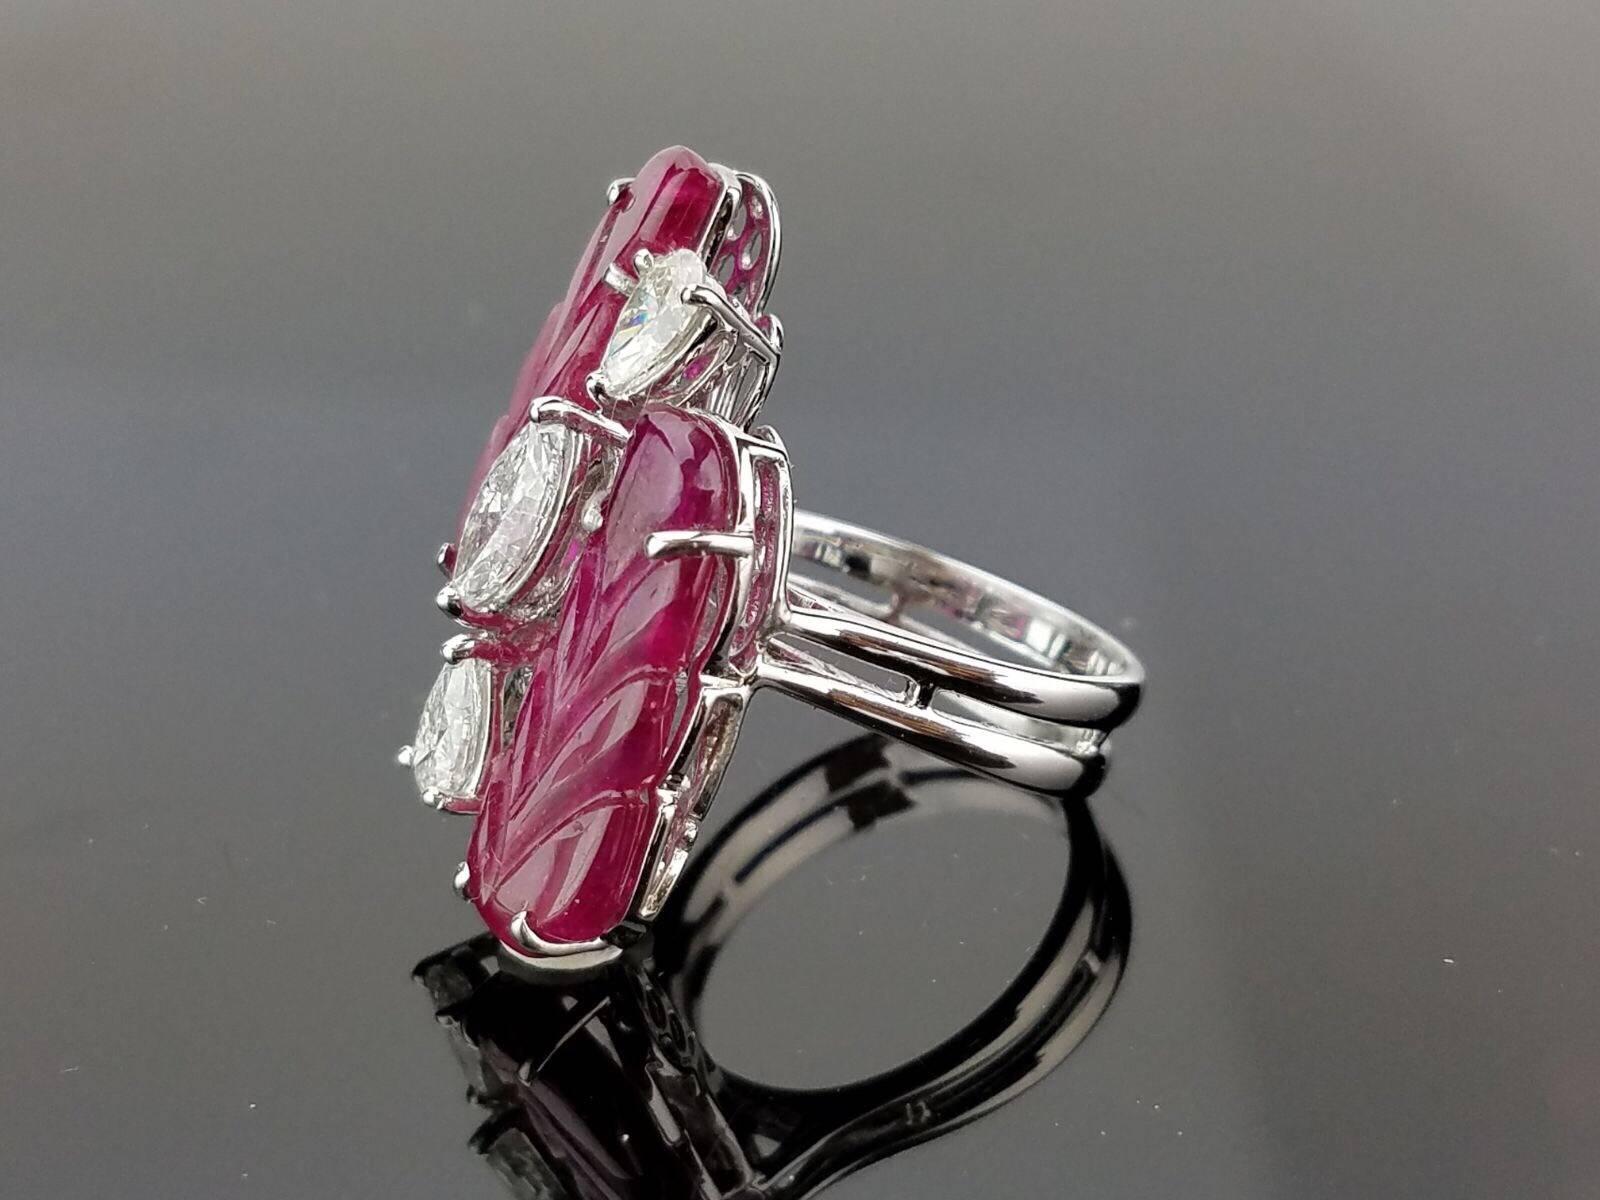 Beautiful cocktail ring, with 2 identical carved Ruby with pear/marquise shaped White Diamond cocktail ring, all set in a white 18K gold. 

Stone Details: 
Stone: Ruby 
Carat Weight: 8.43 Carat

Diamond Details:
Total Carat Weight: 1.19